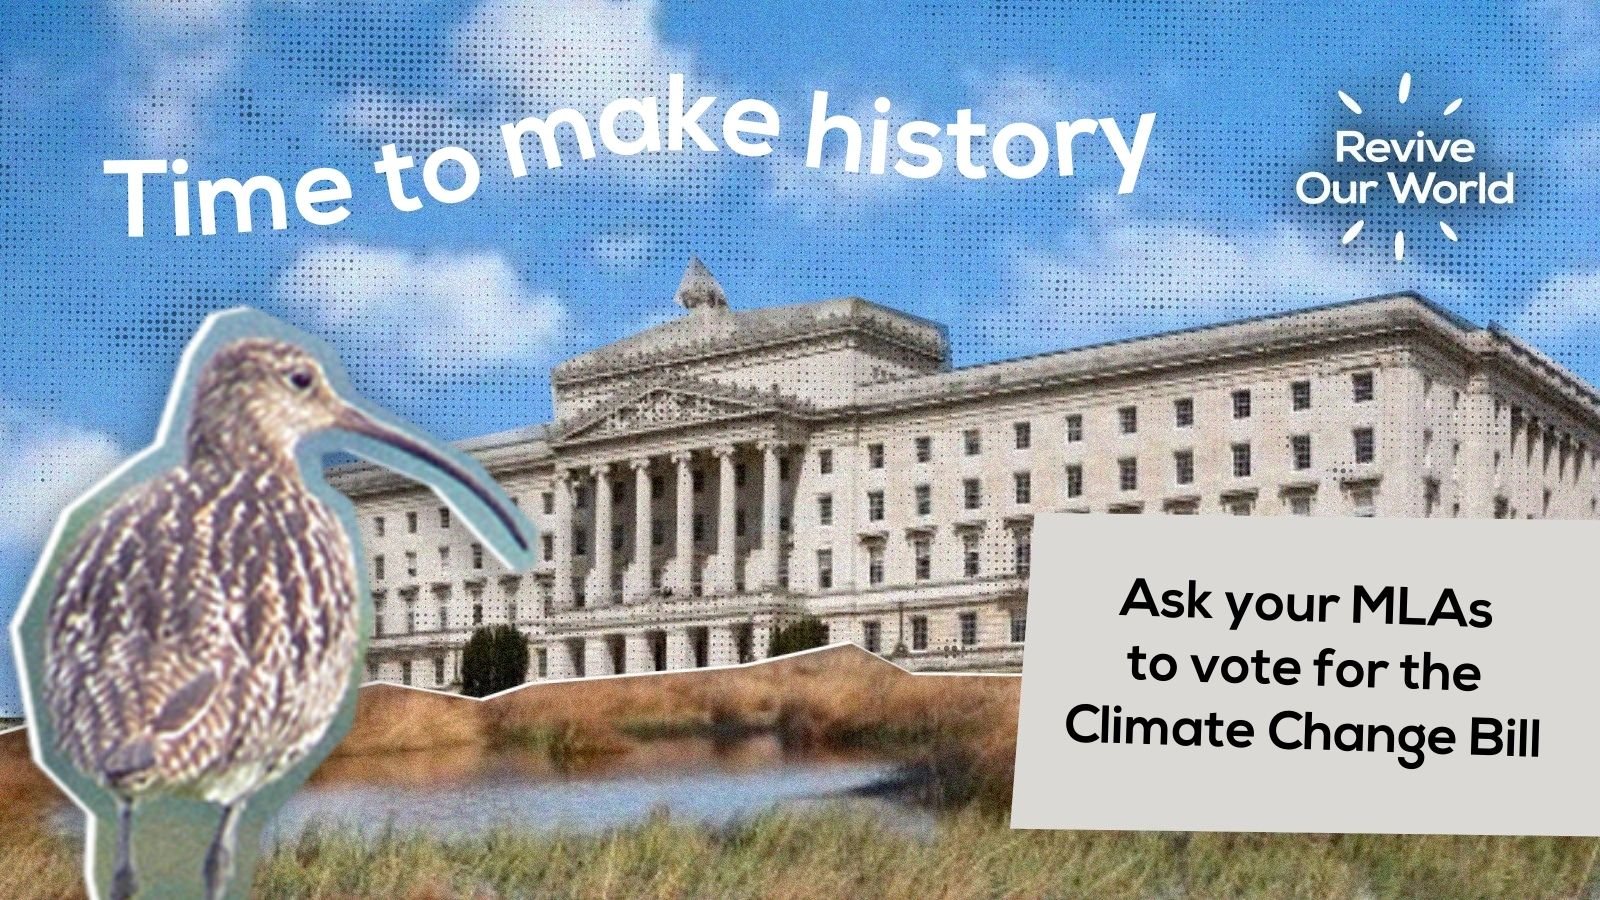 Time to make history. Ask your MLAs to vote in favour of the Climate Change Bill